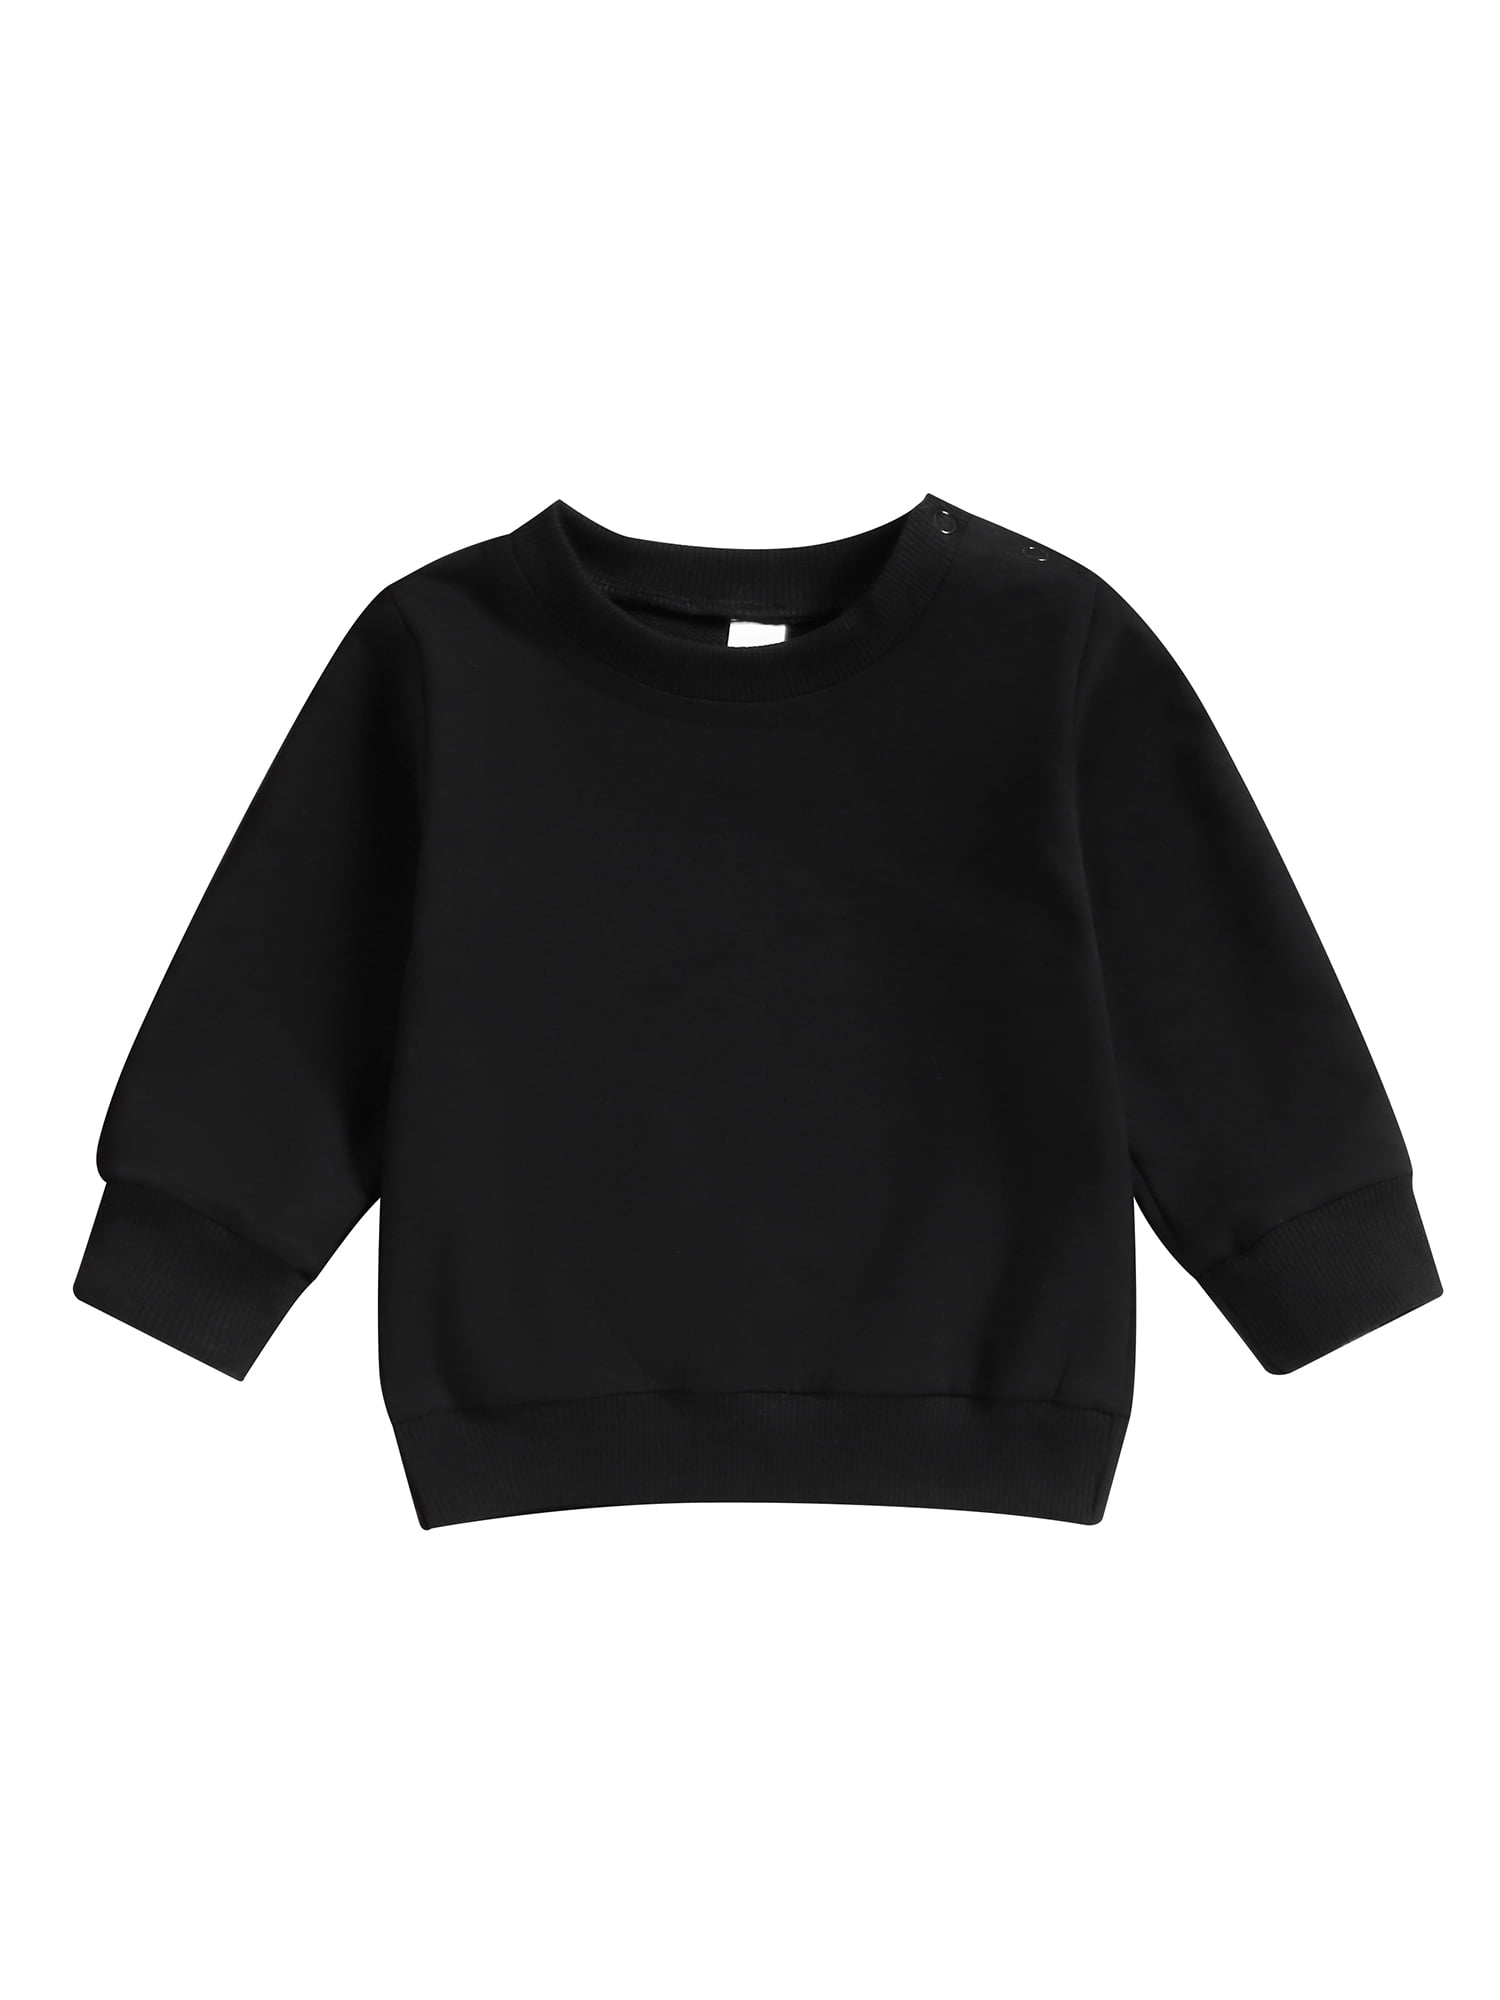 Qtinghua Infant Toddler Baby Boy Tops Long Sweatshirt Fall Crewneck Black Color 12-18 Solid Clothes Sleeve Pullover Months